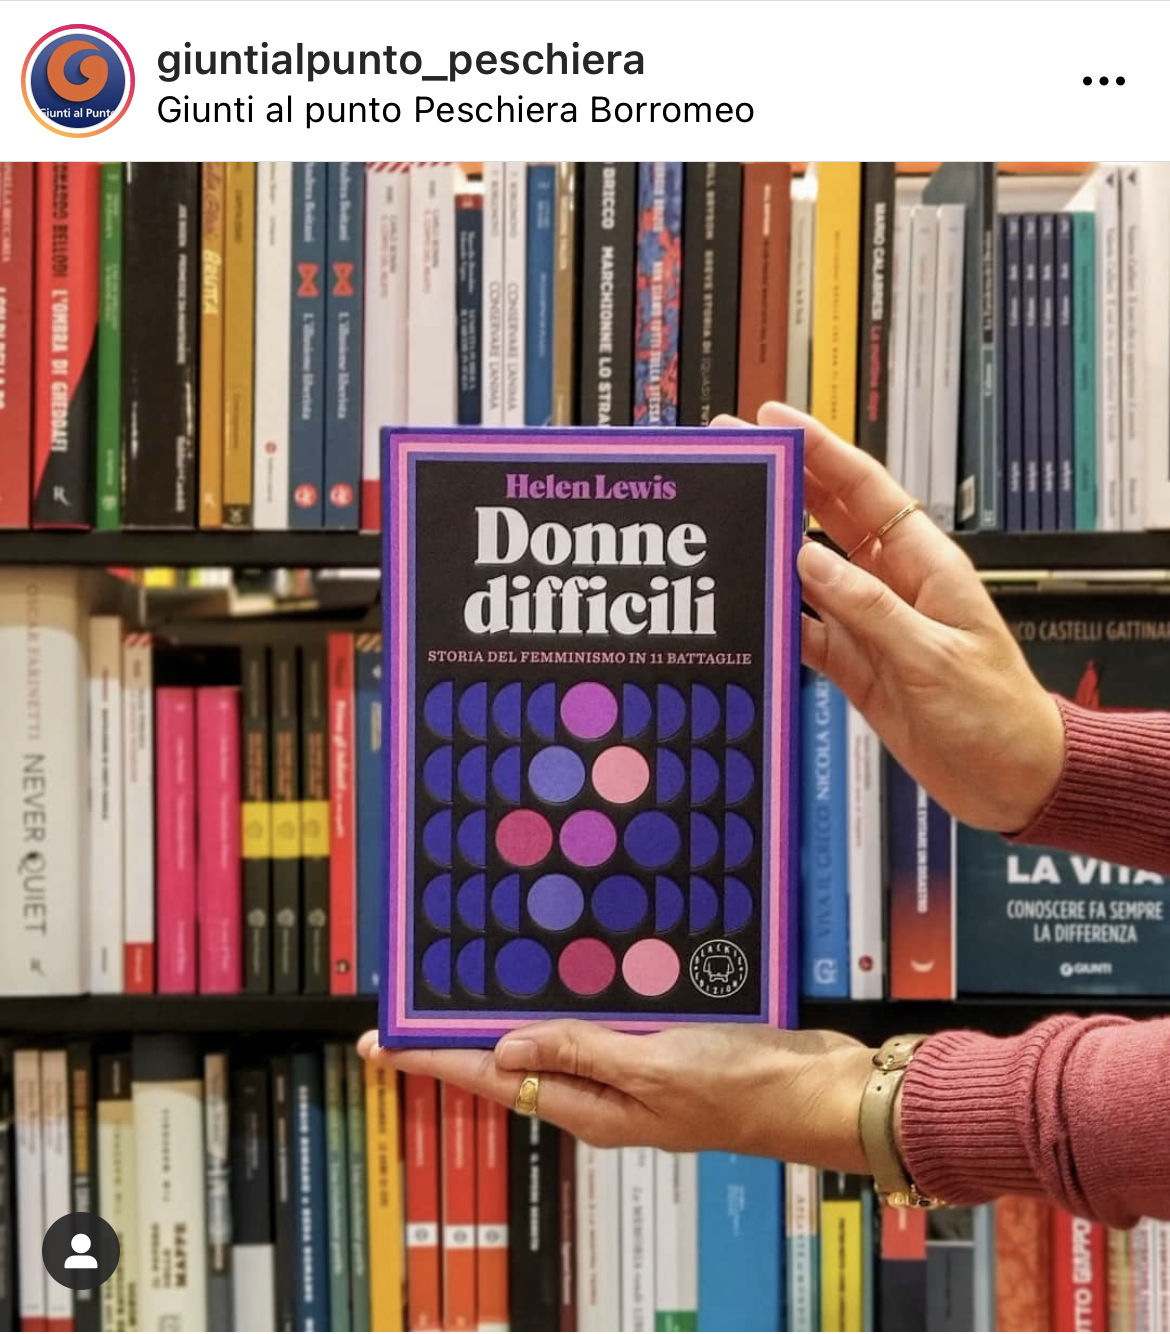 Helen Lewis I Didn T Think I Could Love Any Cover More Than The Uk Edition Of Difficult Women But The Italian Version Is Beautiful Too Photos Via Instagram T Co Hbz0bymrlf